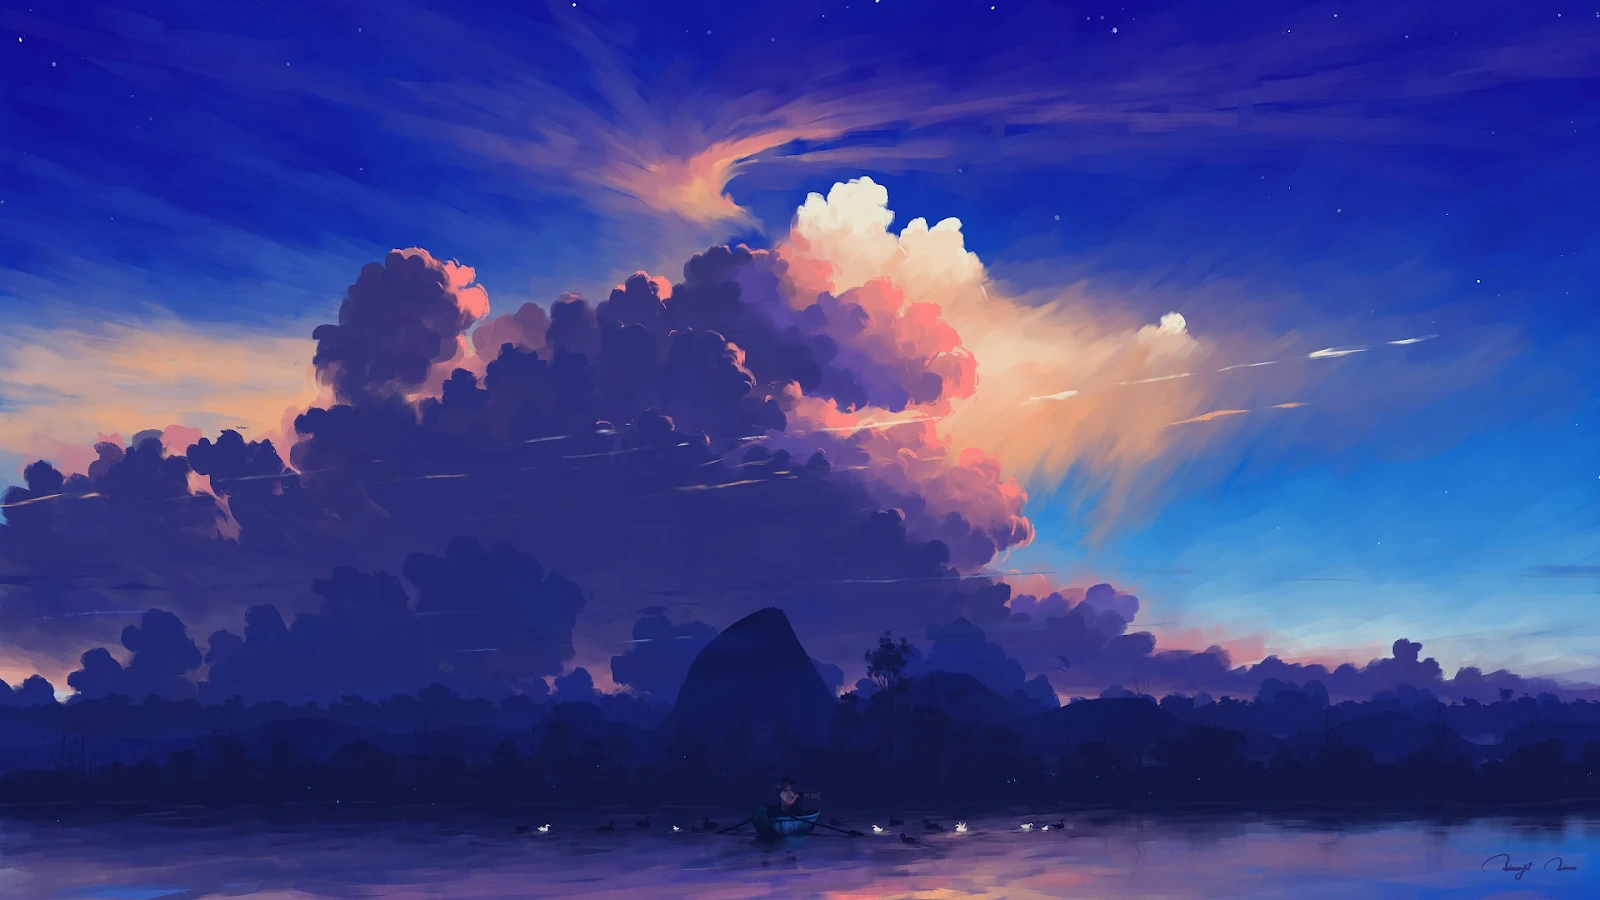 A Stunning Digital Painting, Landscape, Sky, Clouds, Lake Full HD Desktop and Mobile Wallpaper Background (1920x1080)